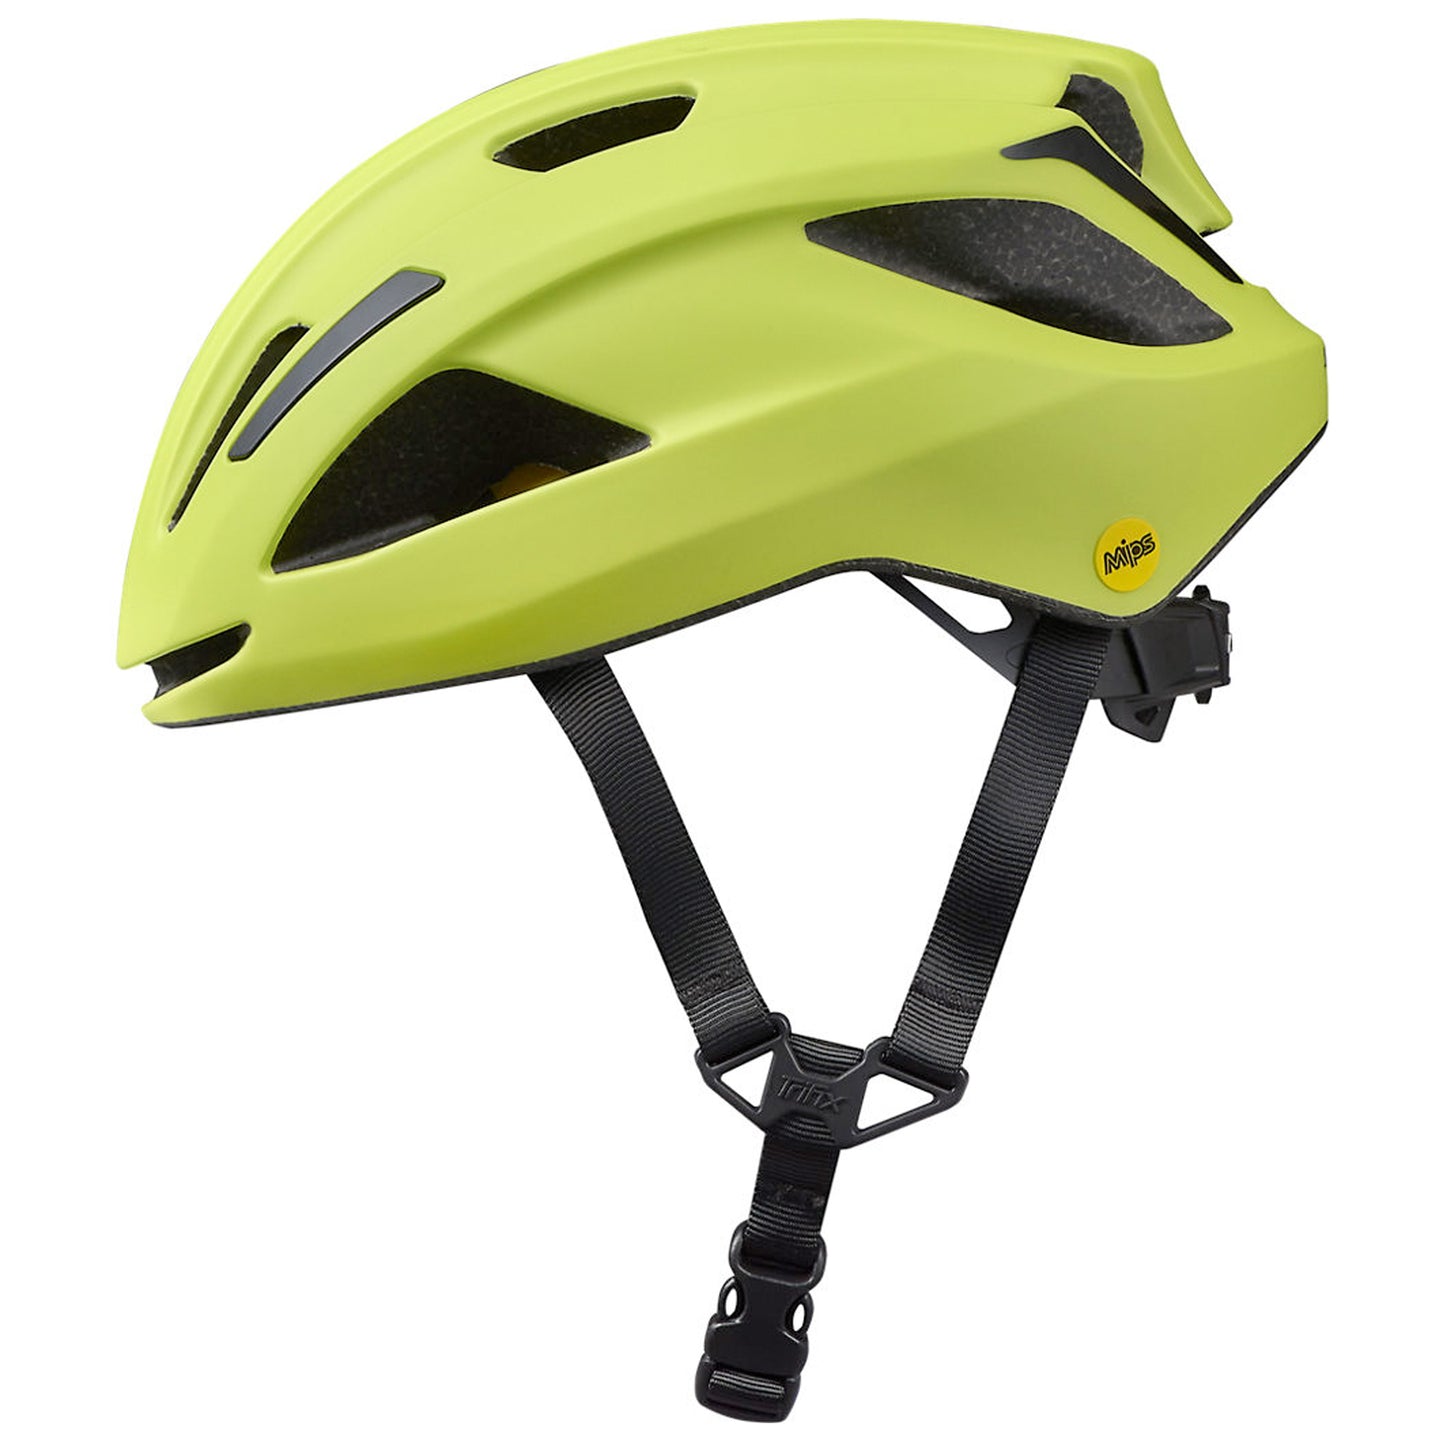 Specialized Align 2 Mips Road Helmet, Hyprviz buy online at Woolys Wheels Sydney with free delivery